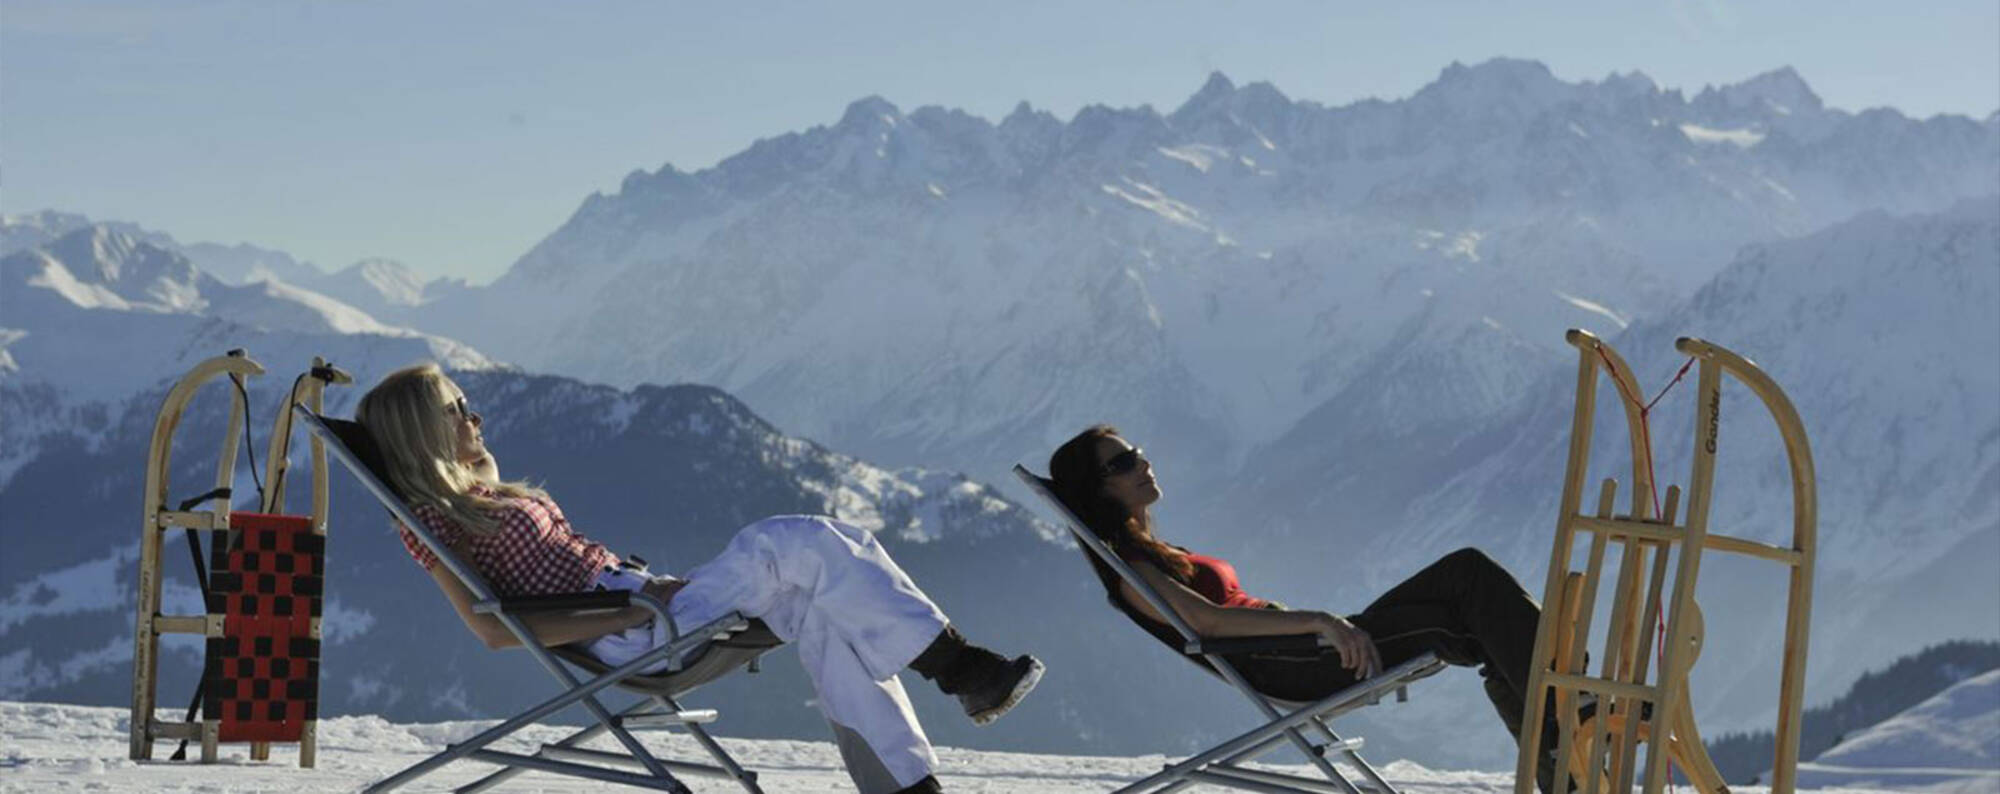 SkiBoutique luxury ski holidays are relaxing 